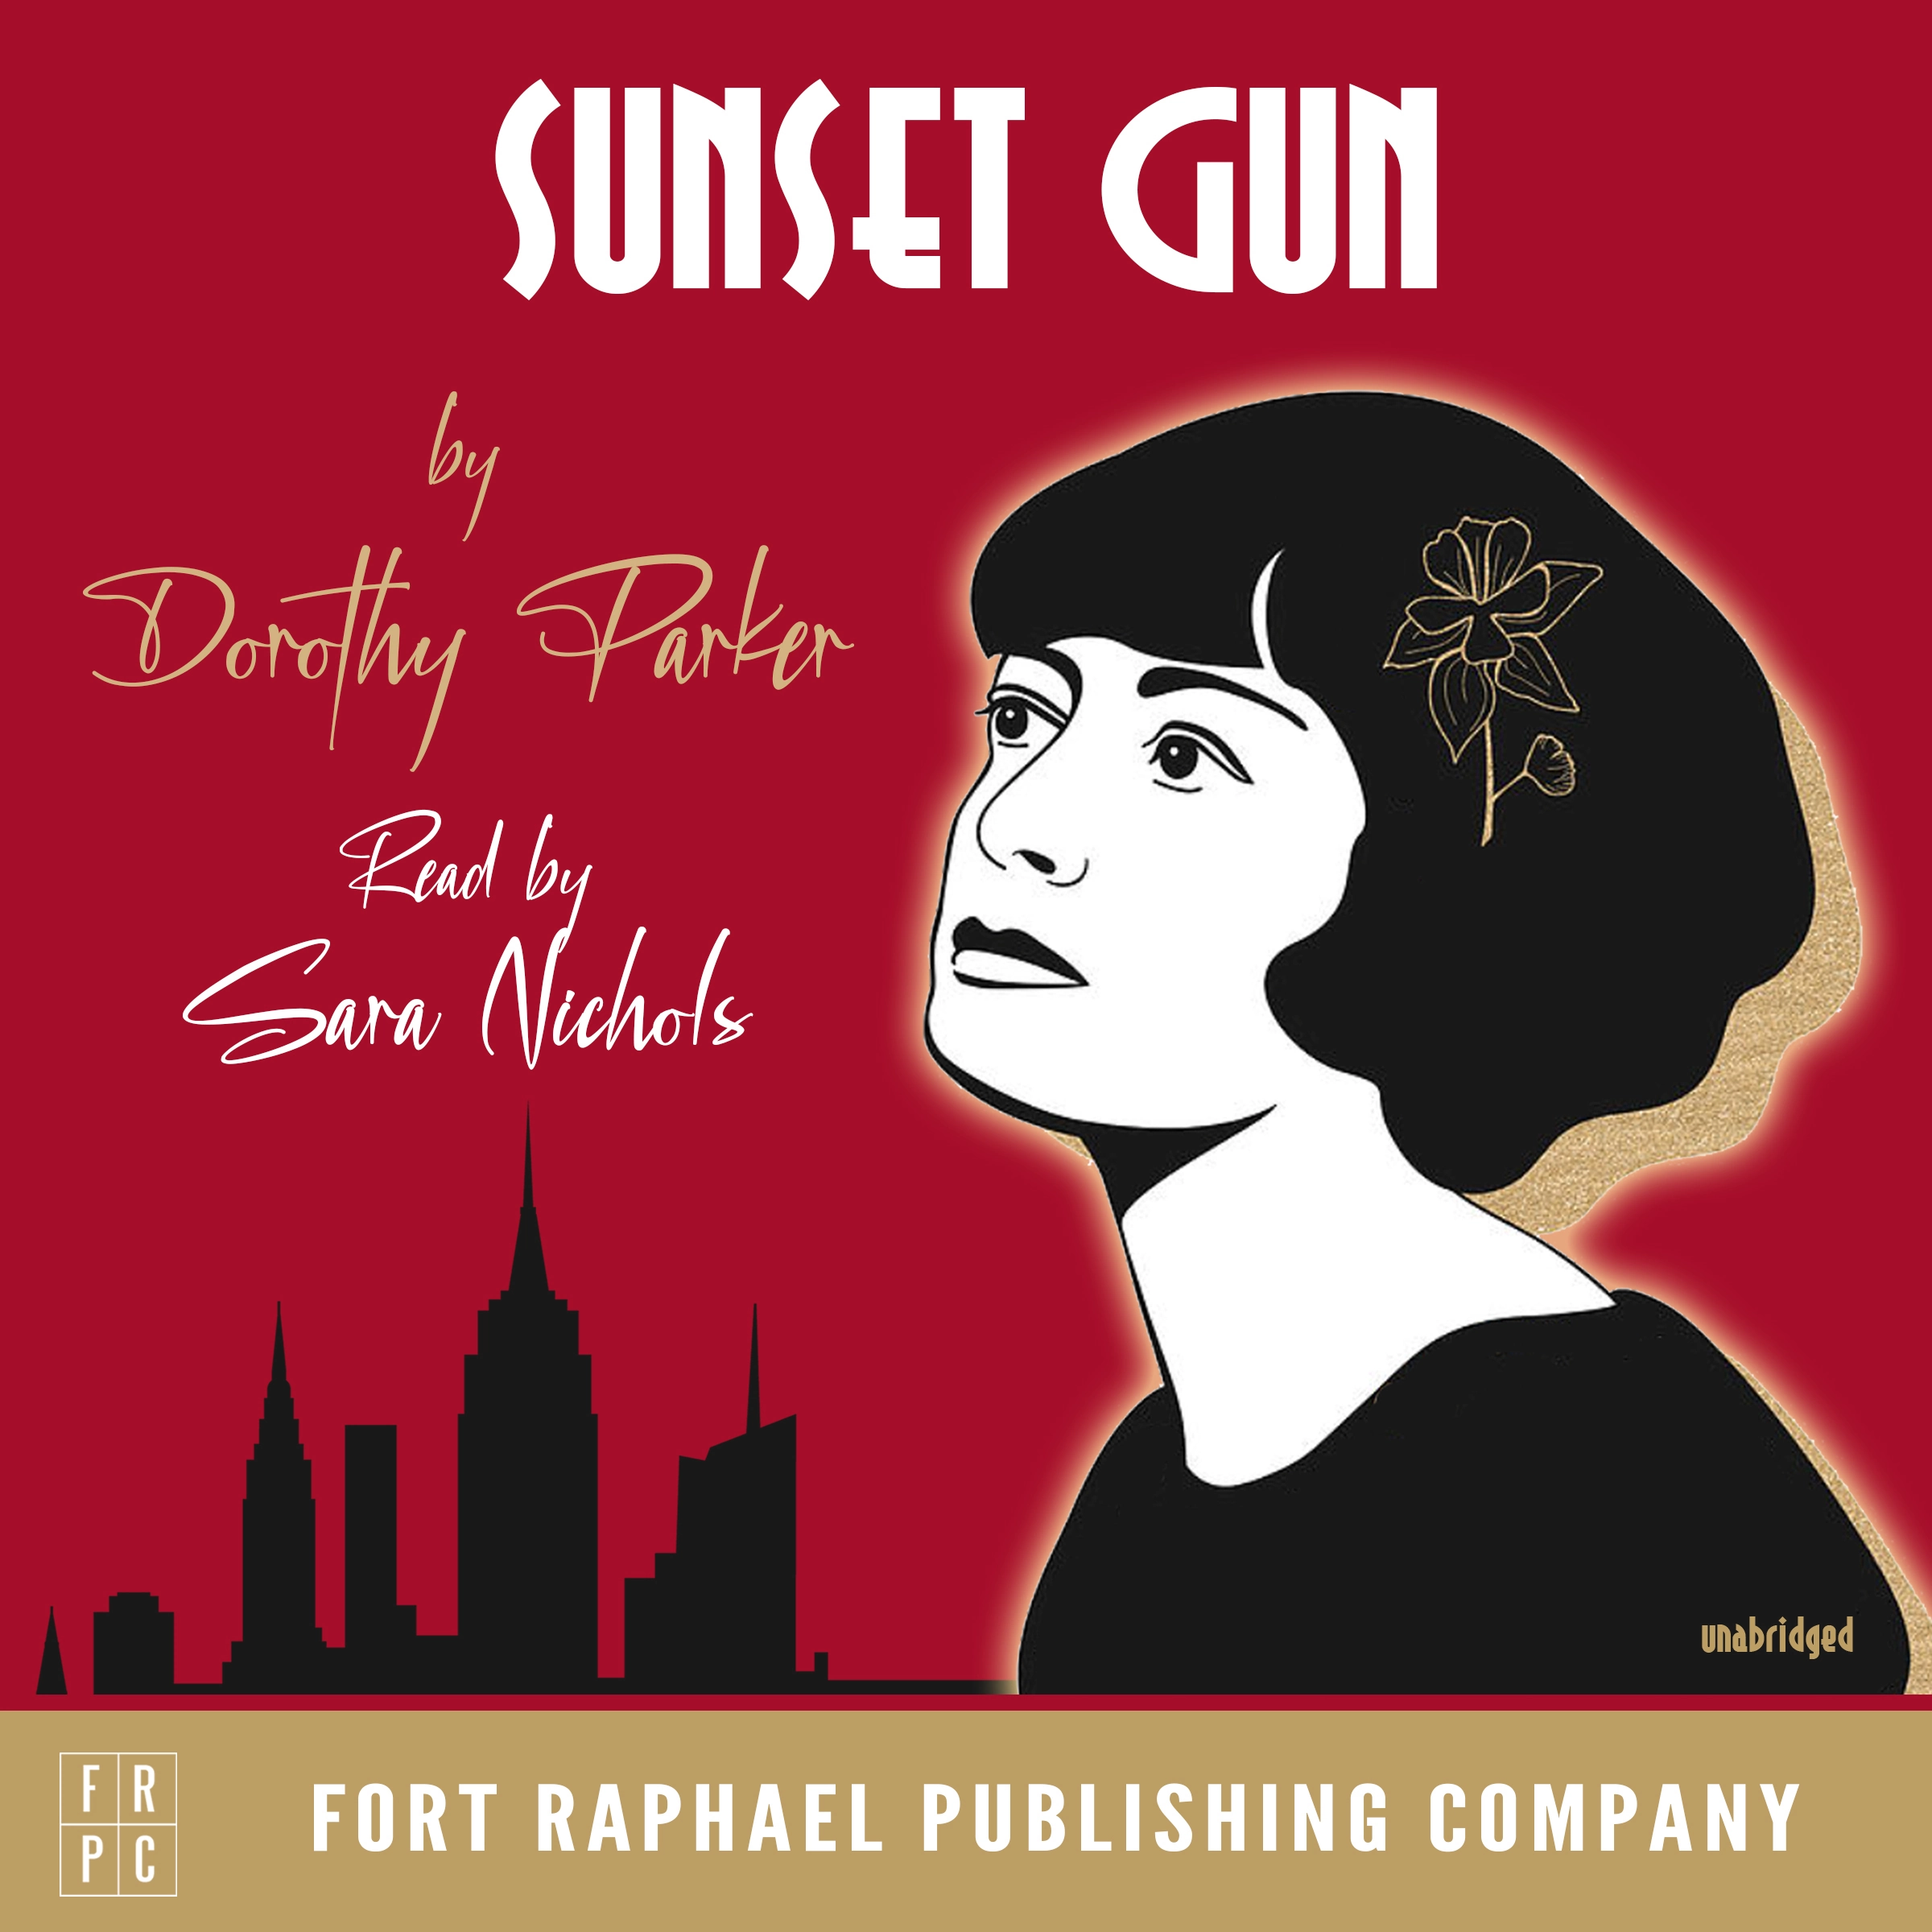 Sunset Gun - Poems by Dorothy Parker - Unabridged by Dorothy Parker Audiobook